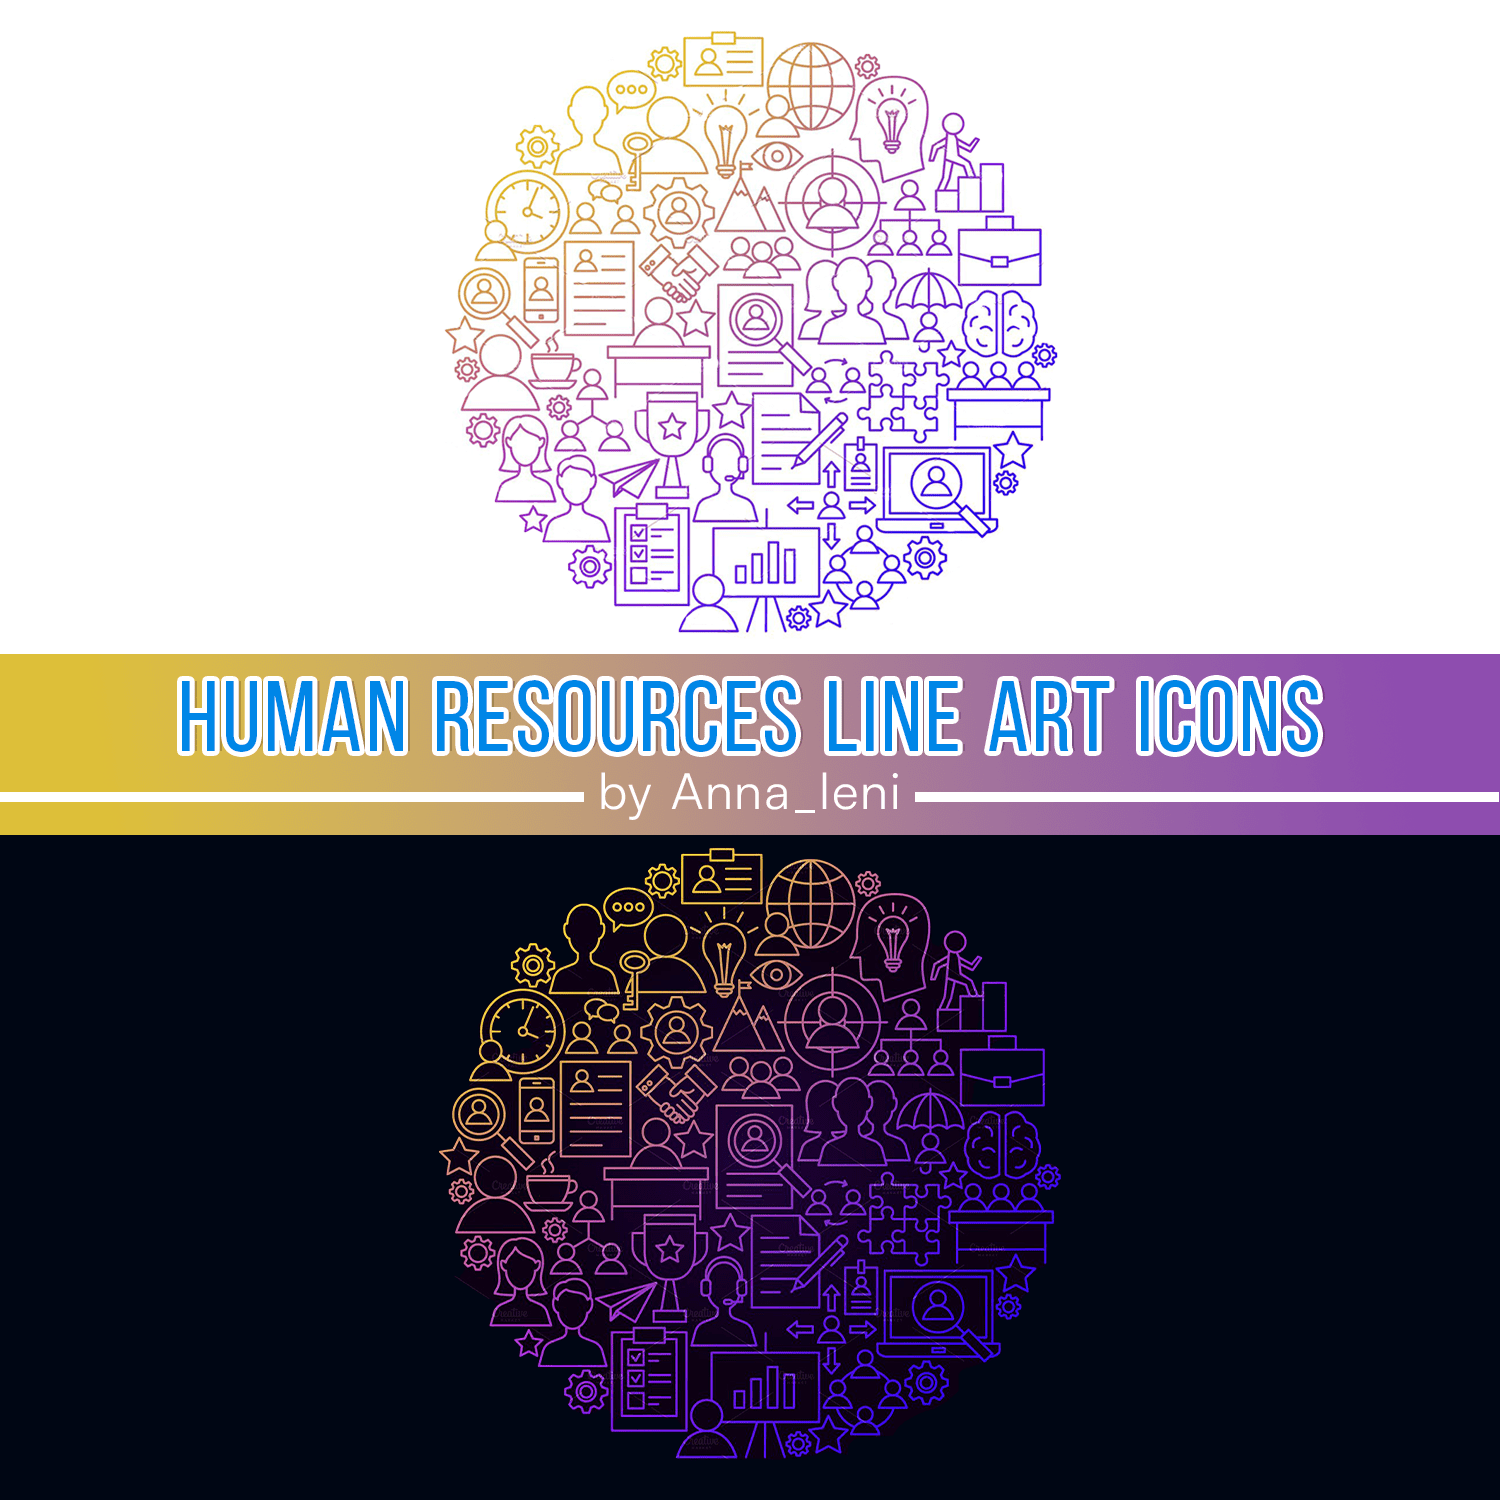 Human Resources Line Art Icons cover.